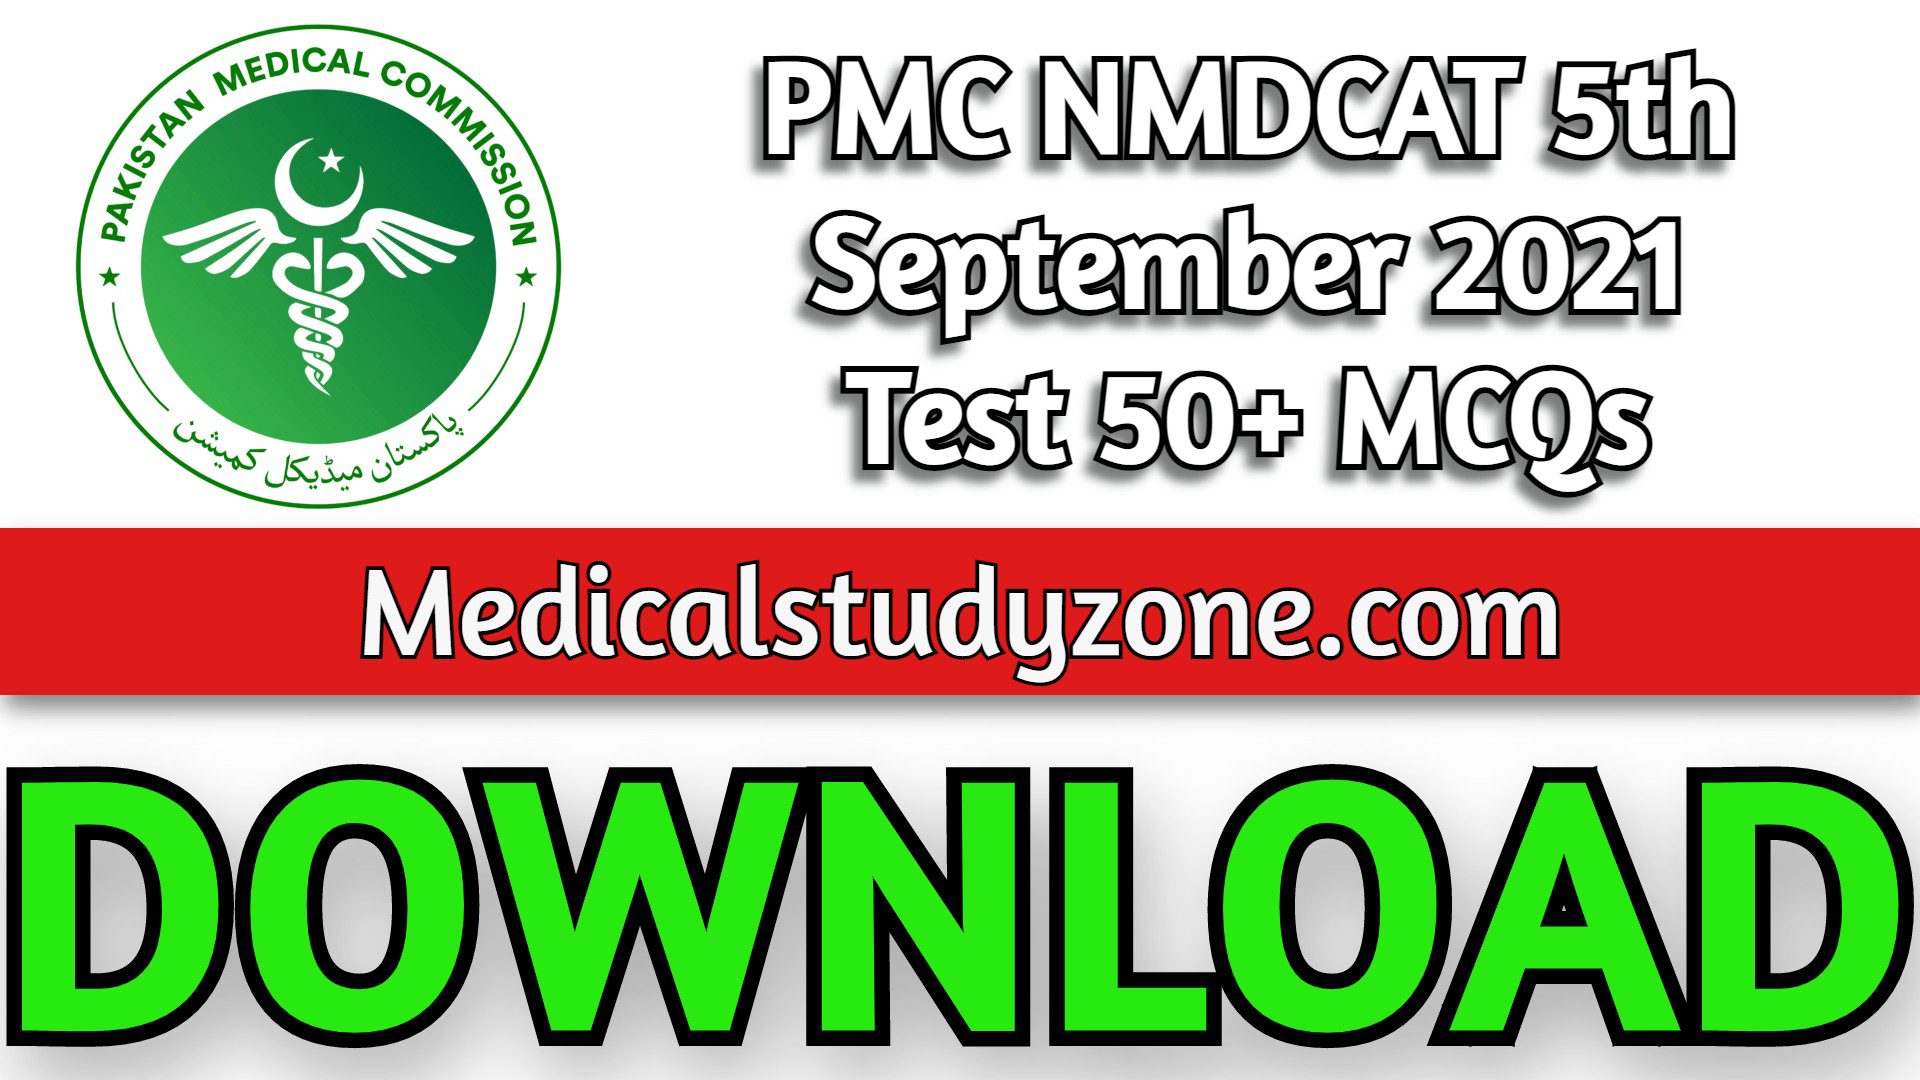 PMC NMDCAT 5th September 2021 Test 50+ MCQs Collection PDF Free Download